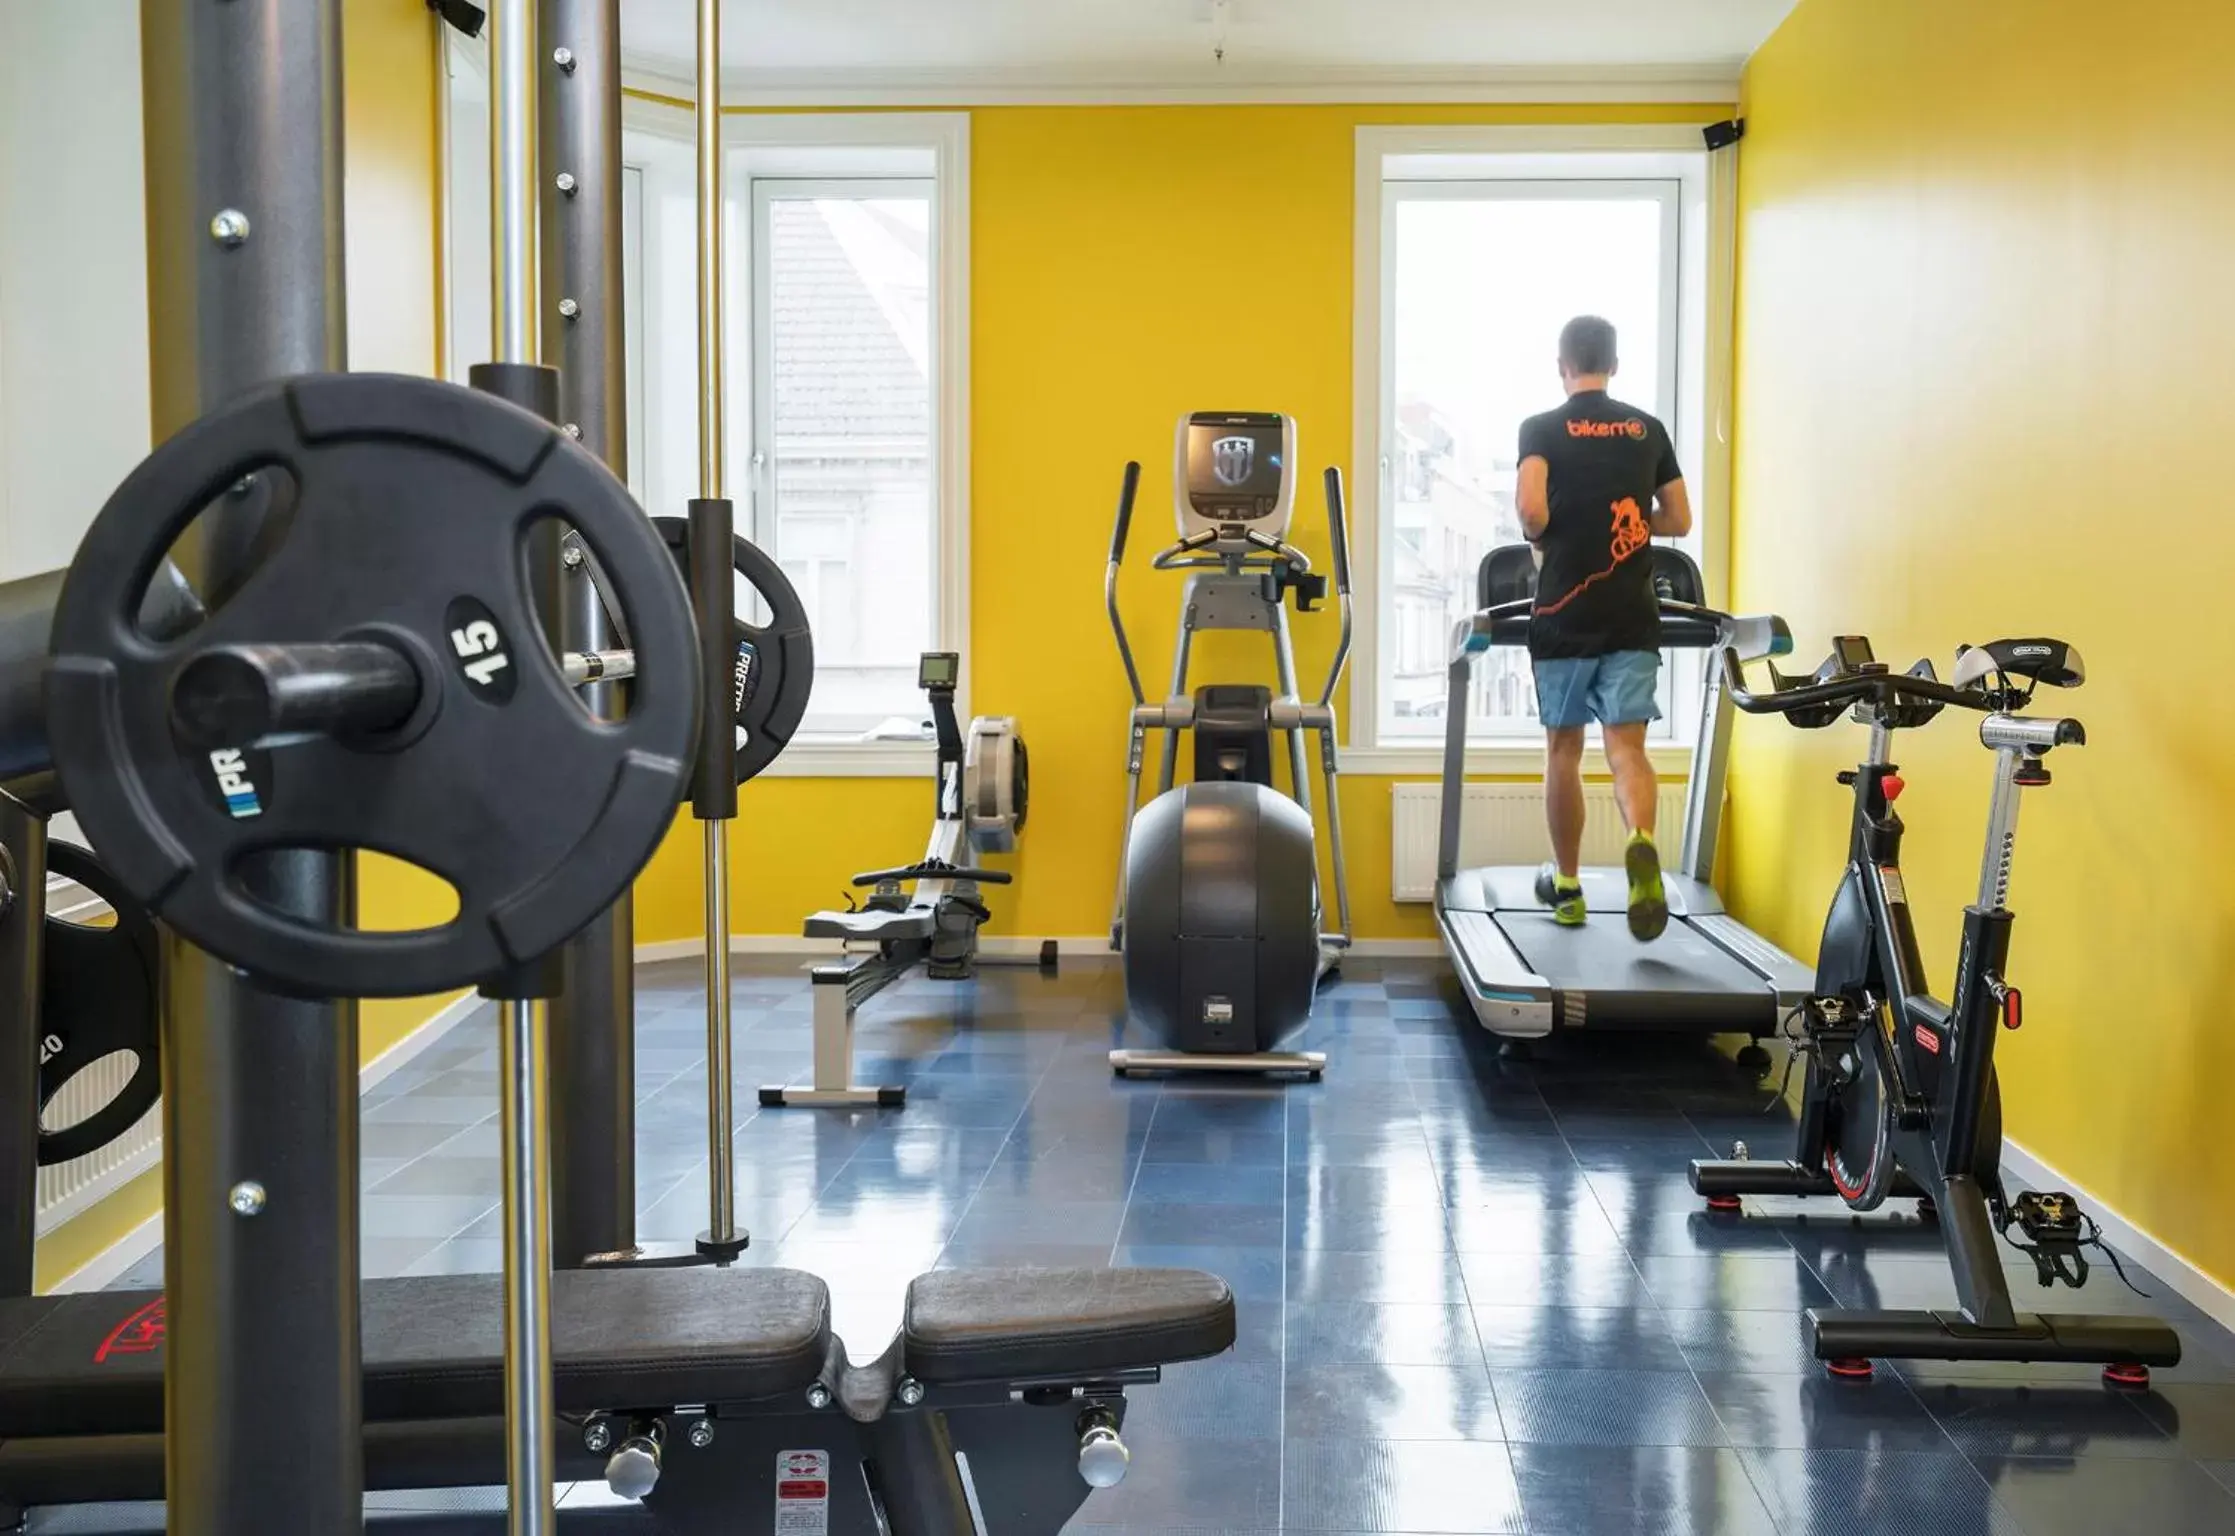 Fitness centre/facilities, Fitness Center/Facilities in Thon Hotel Nidaros